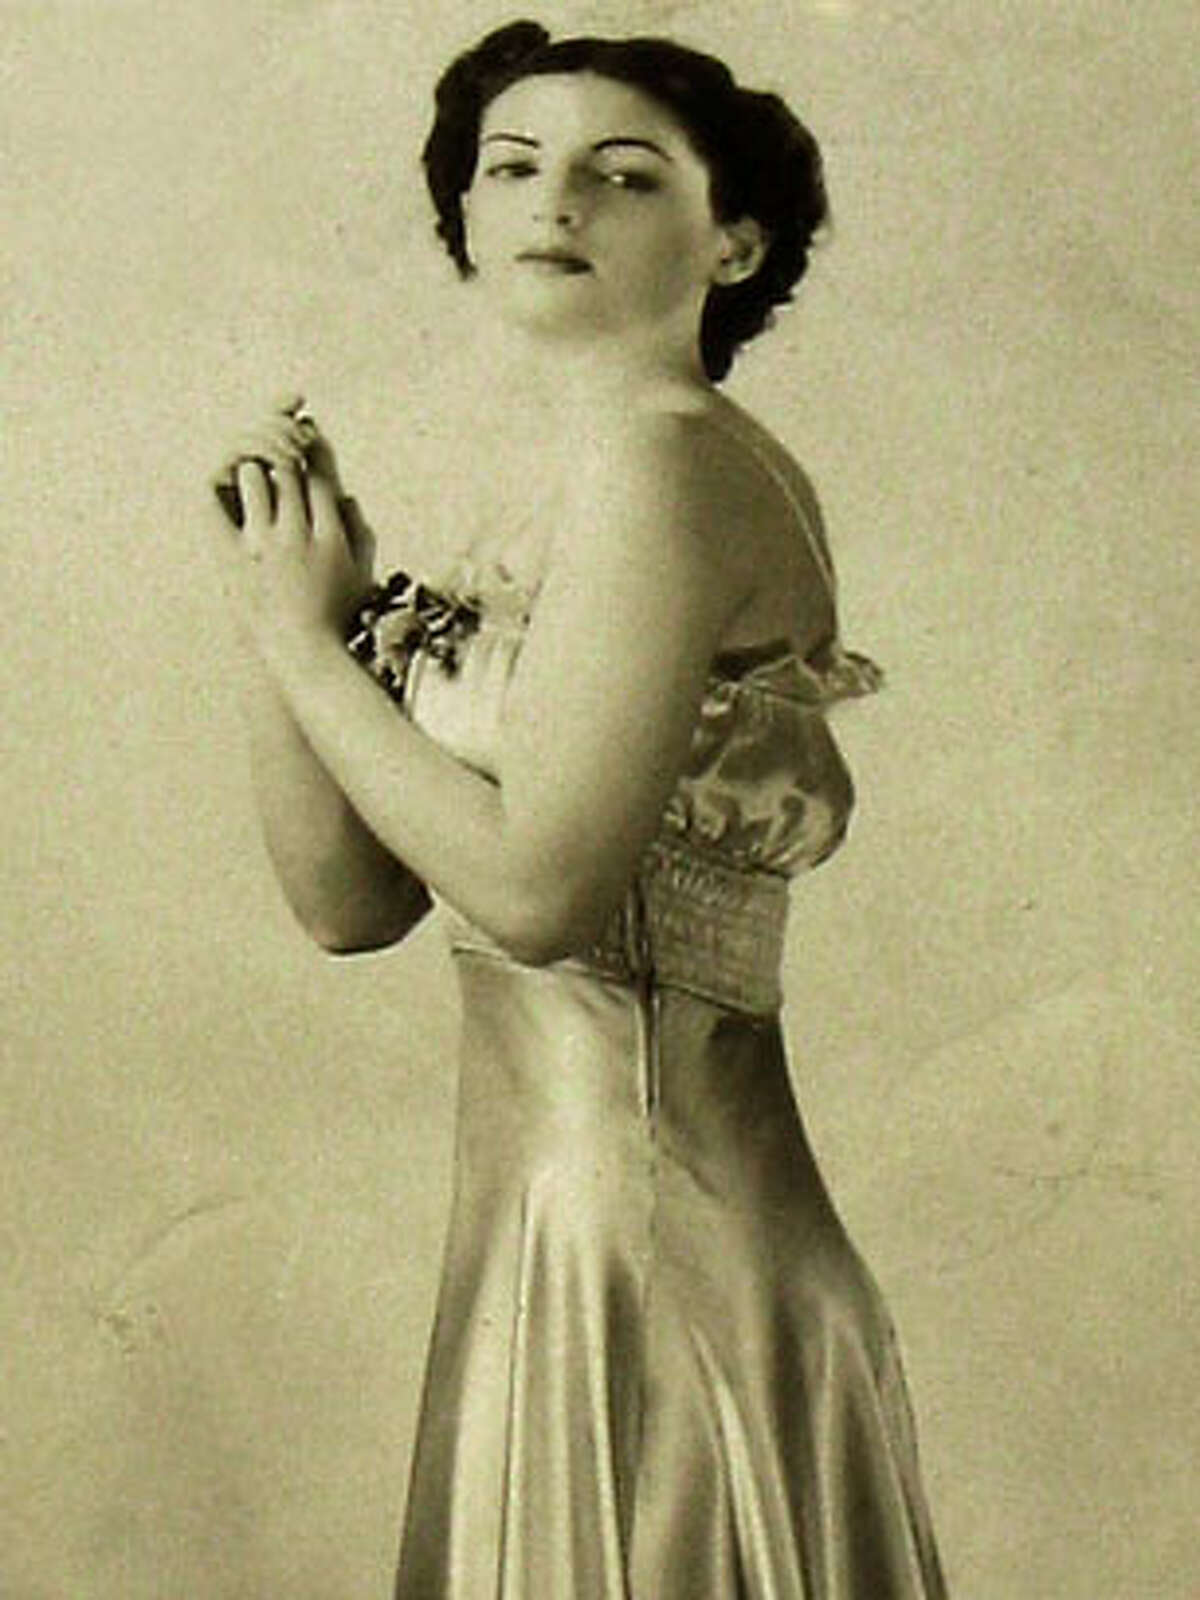 Photo of Esther Weintraub as a model, for obit of 89 yearold Jewish comic.